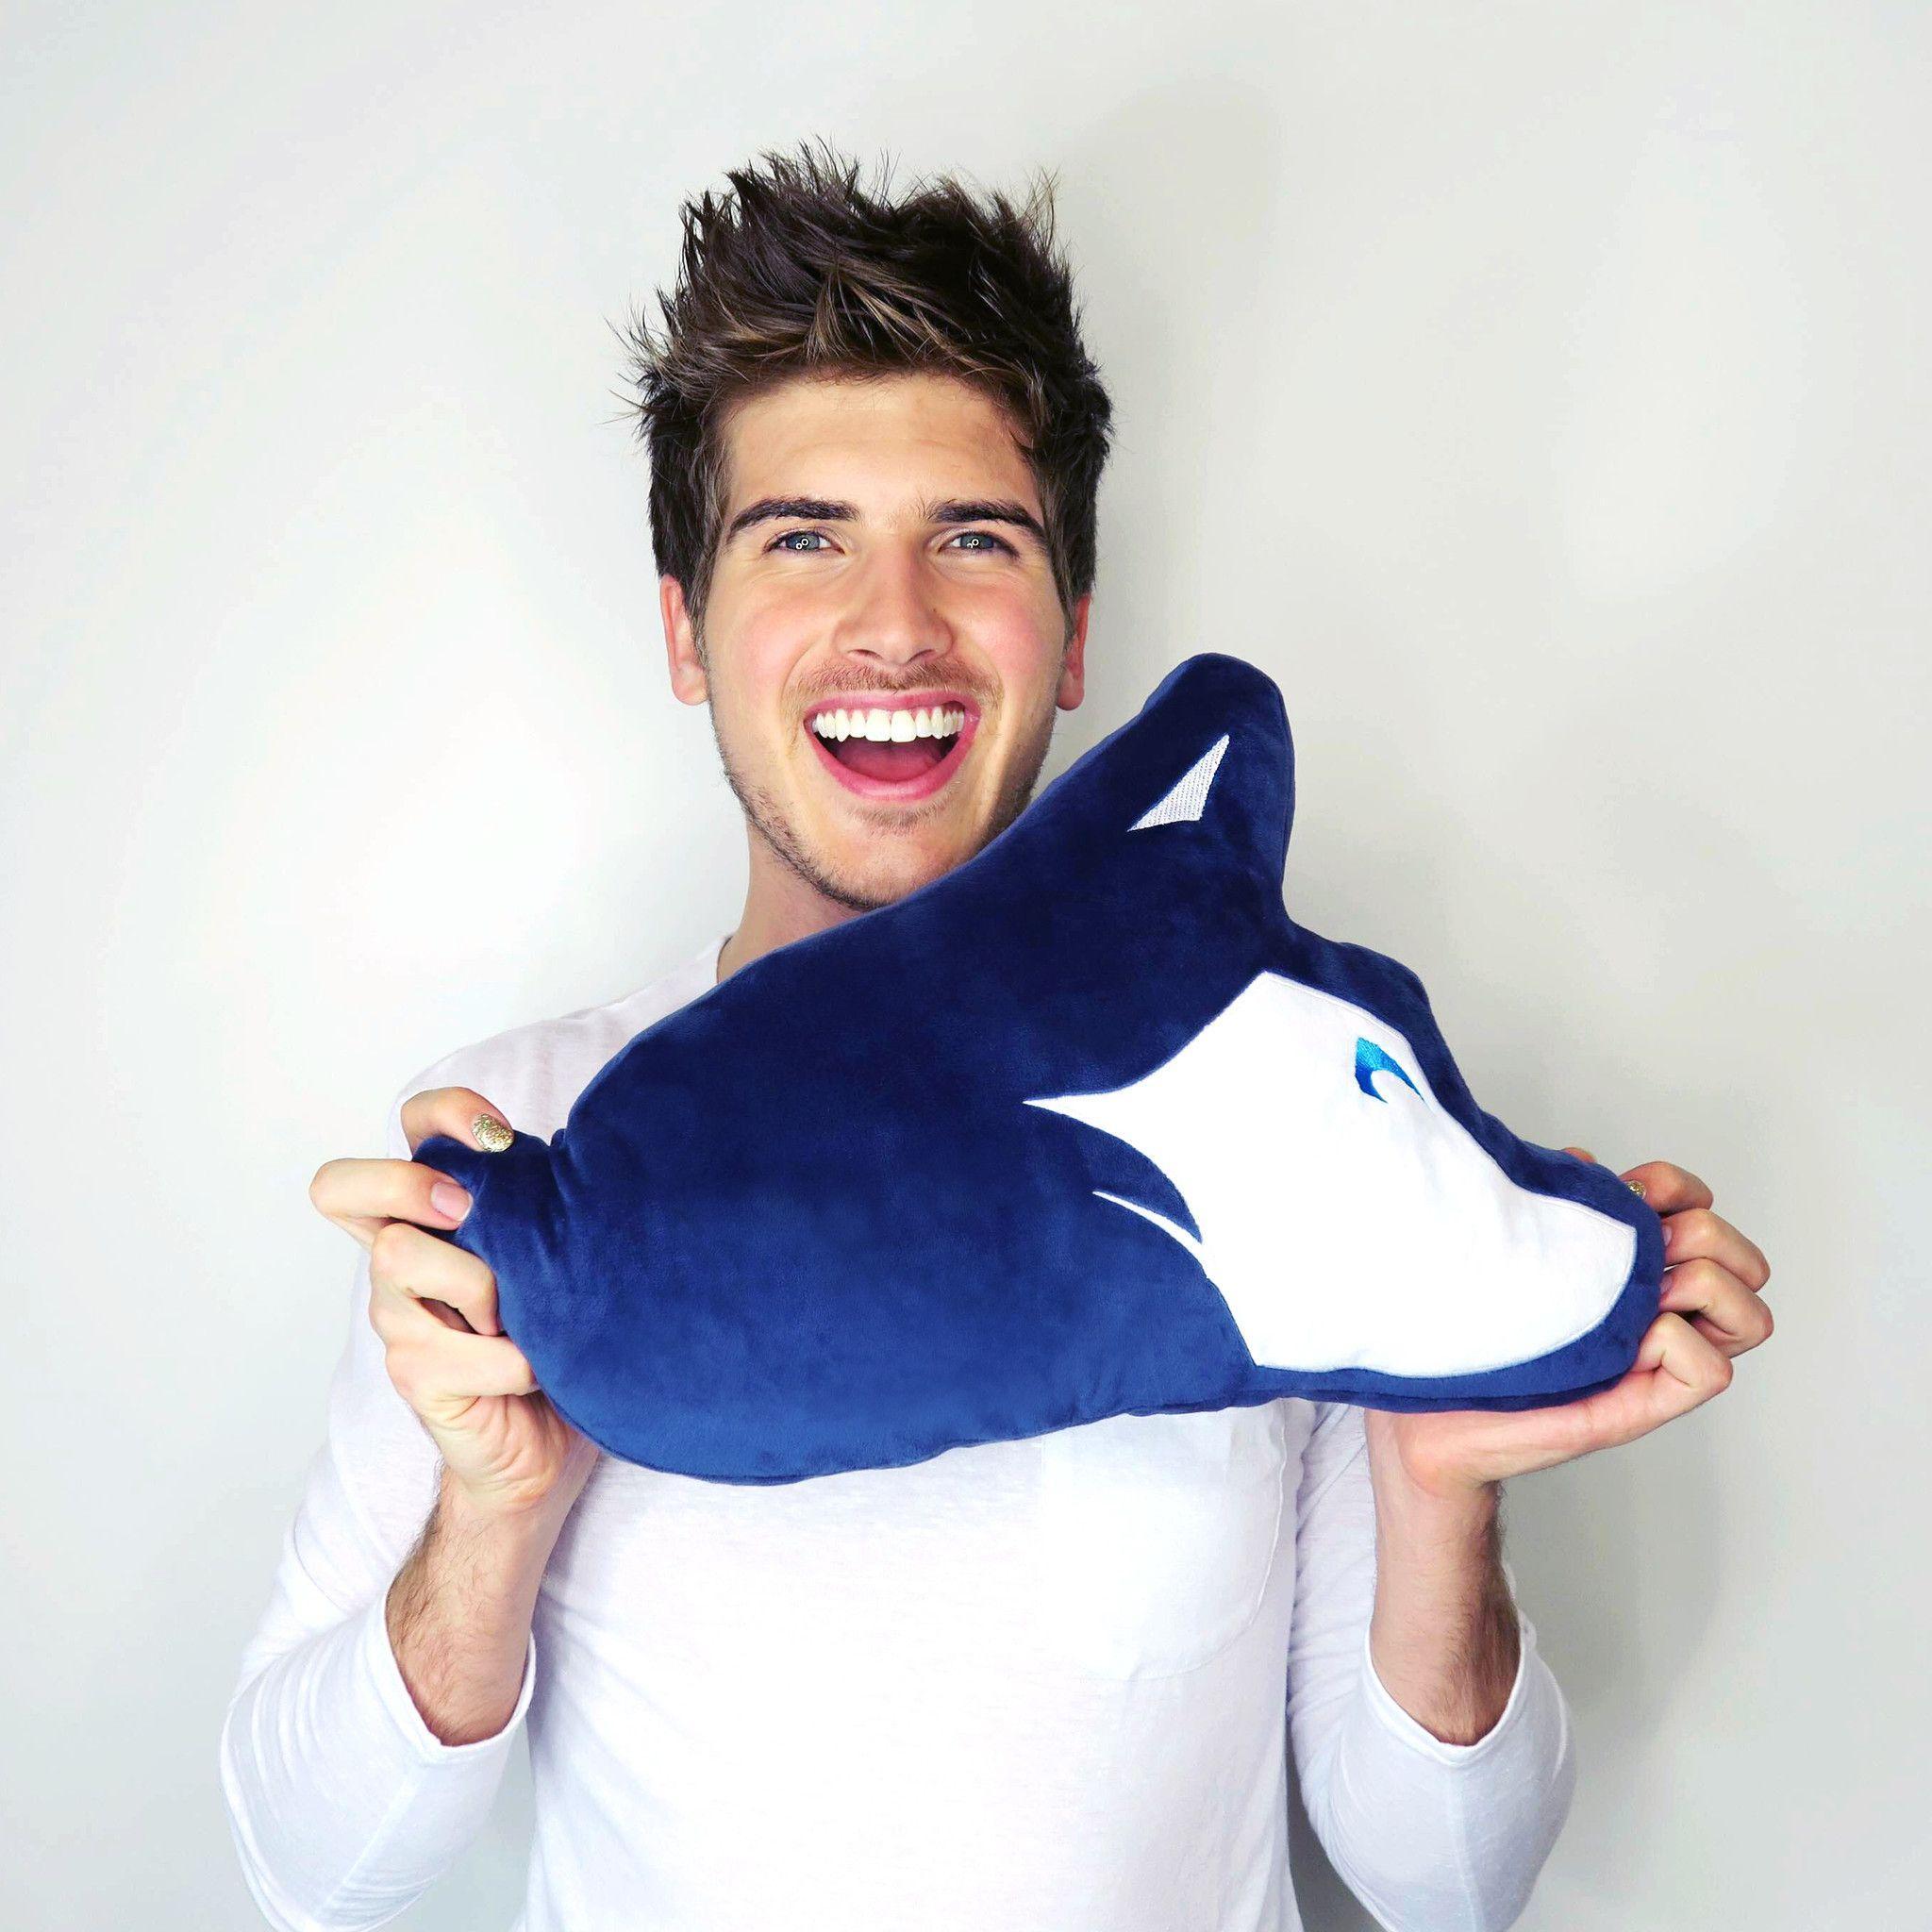 Joey Graceffa Talks About Life After Coming Out at Stream Con